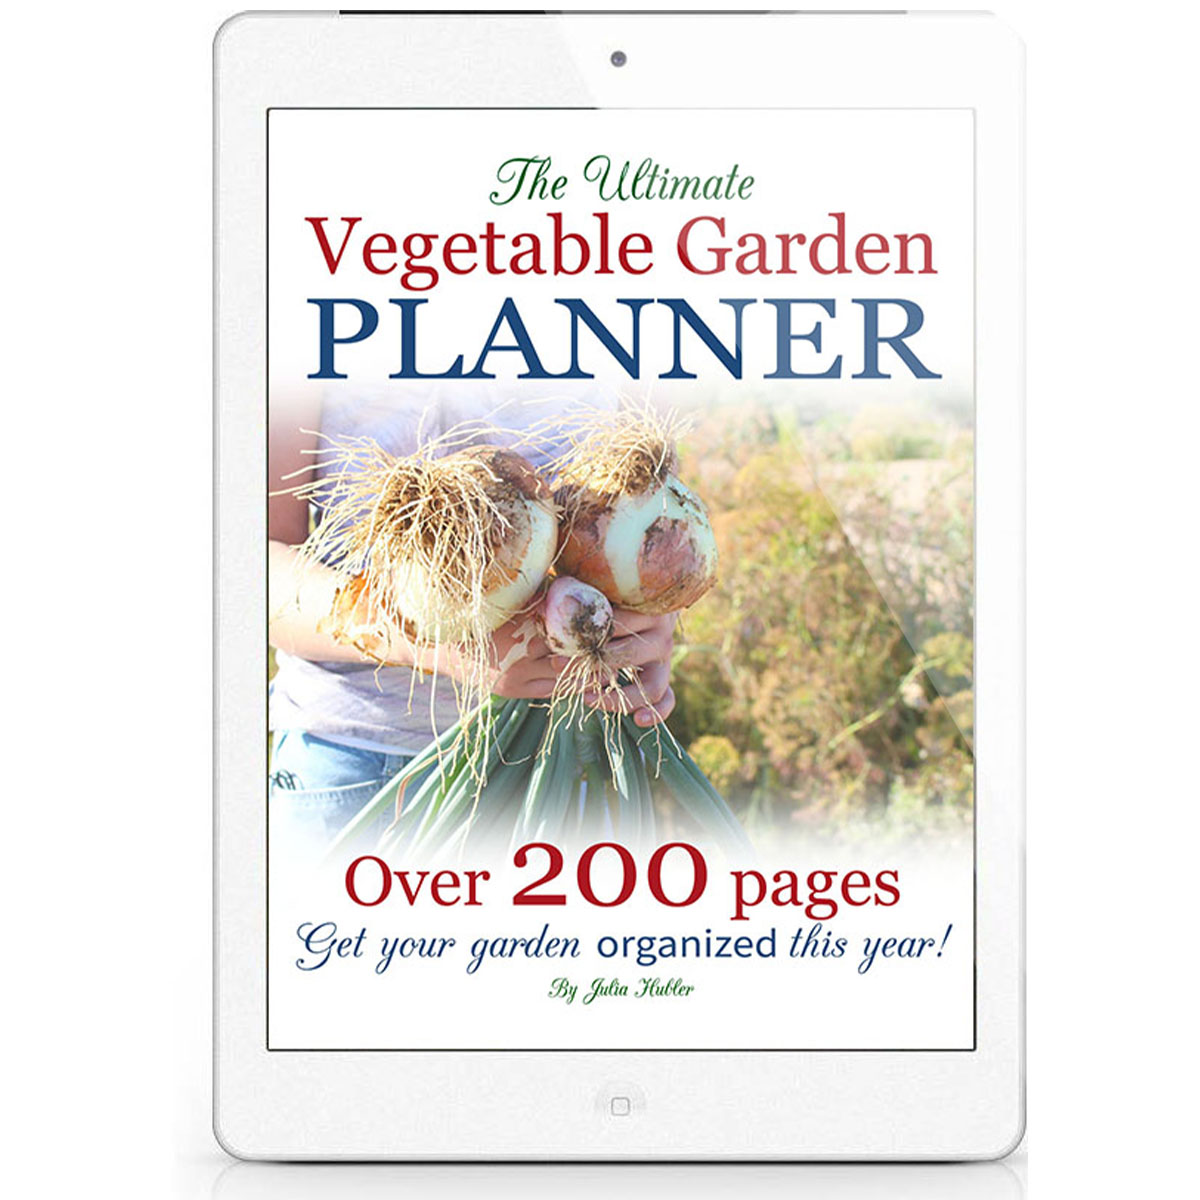 vegetable garden planner sales page ipad cover